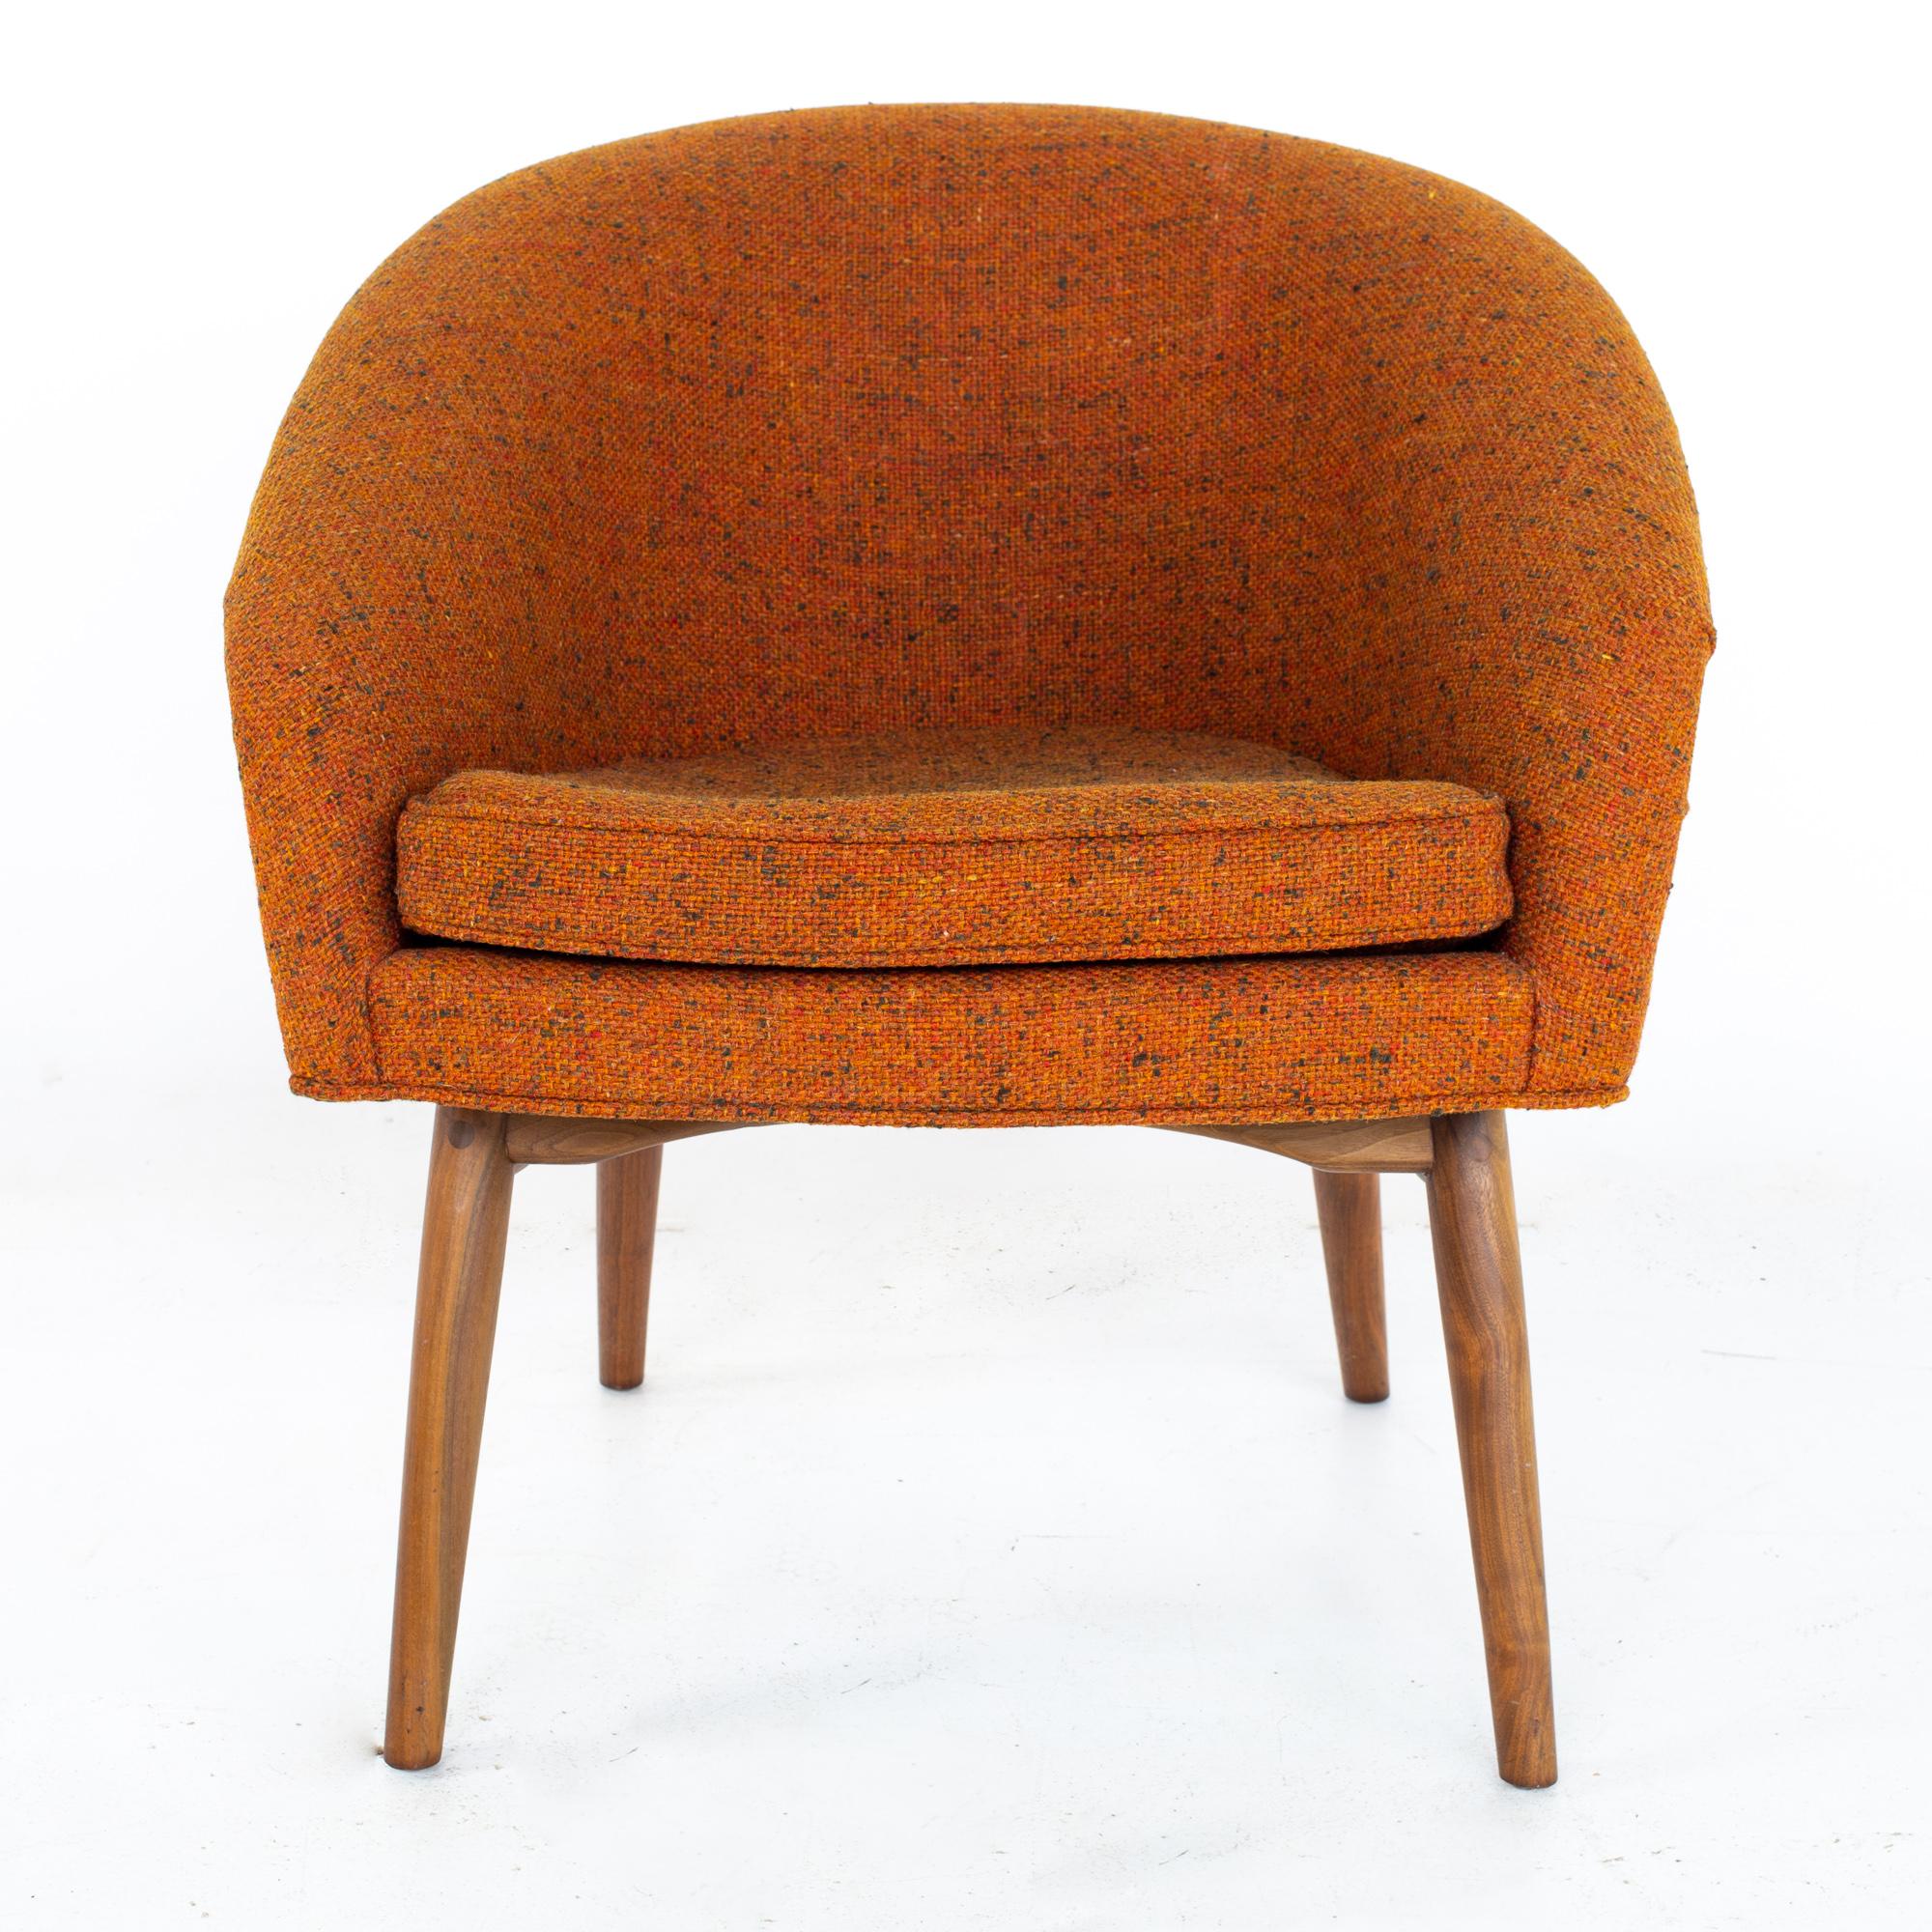 Late 20th Century Milo Baughman for Thayer Coggin MCM Orange Upholstered Lounge Chairs, a Pair